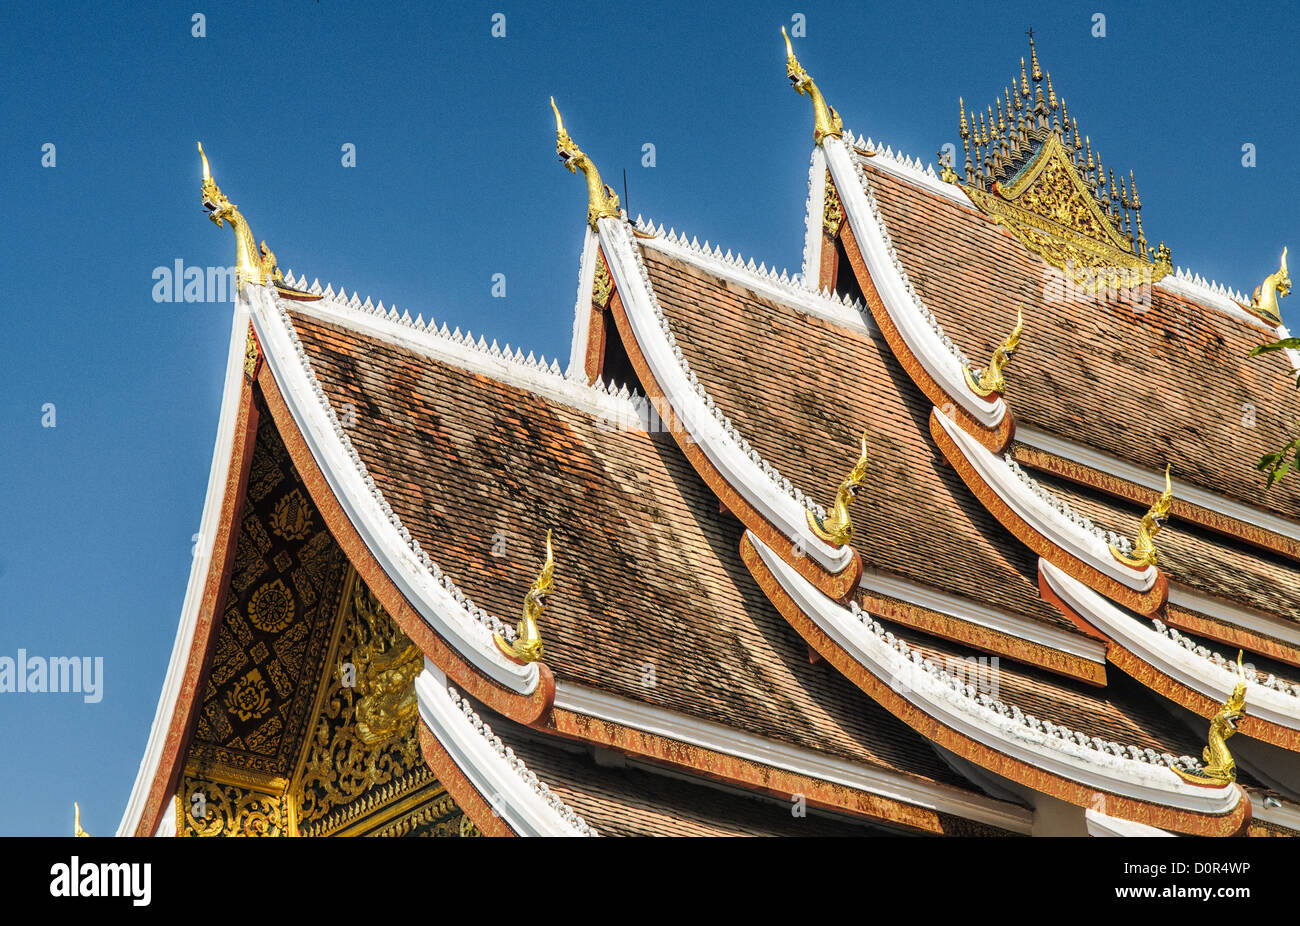 LUANG PRABANG, Laos - The multi-tiered roof at Haw Pha Bang (or Palace Chapel) at the Royal Palace Museum in Luang Prabang, Laos. The chapel sits at the northeastern corner of the grounds. Construction started in 1963. Stock Photo